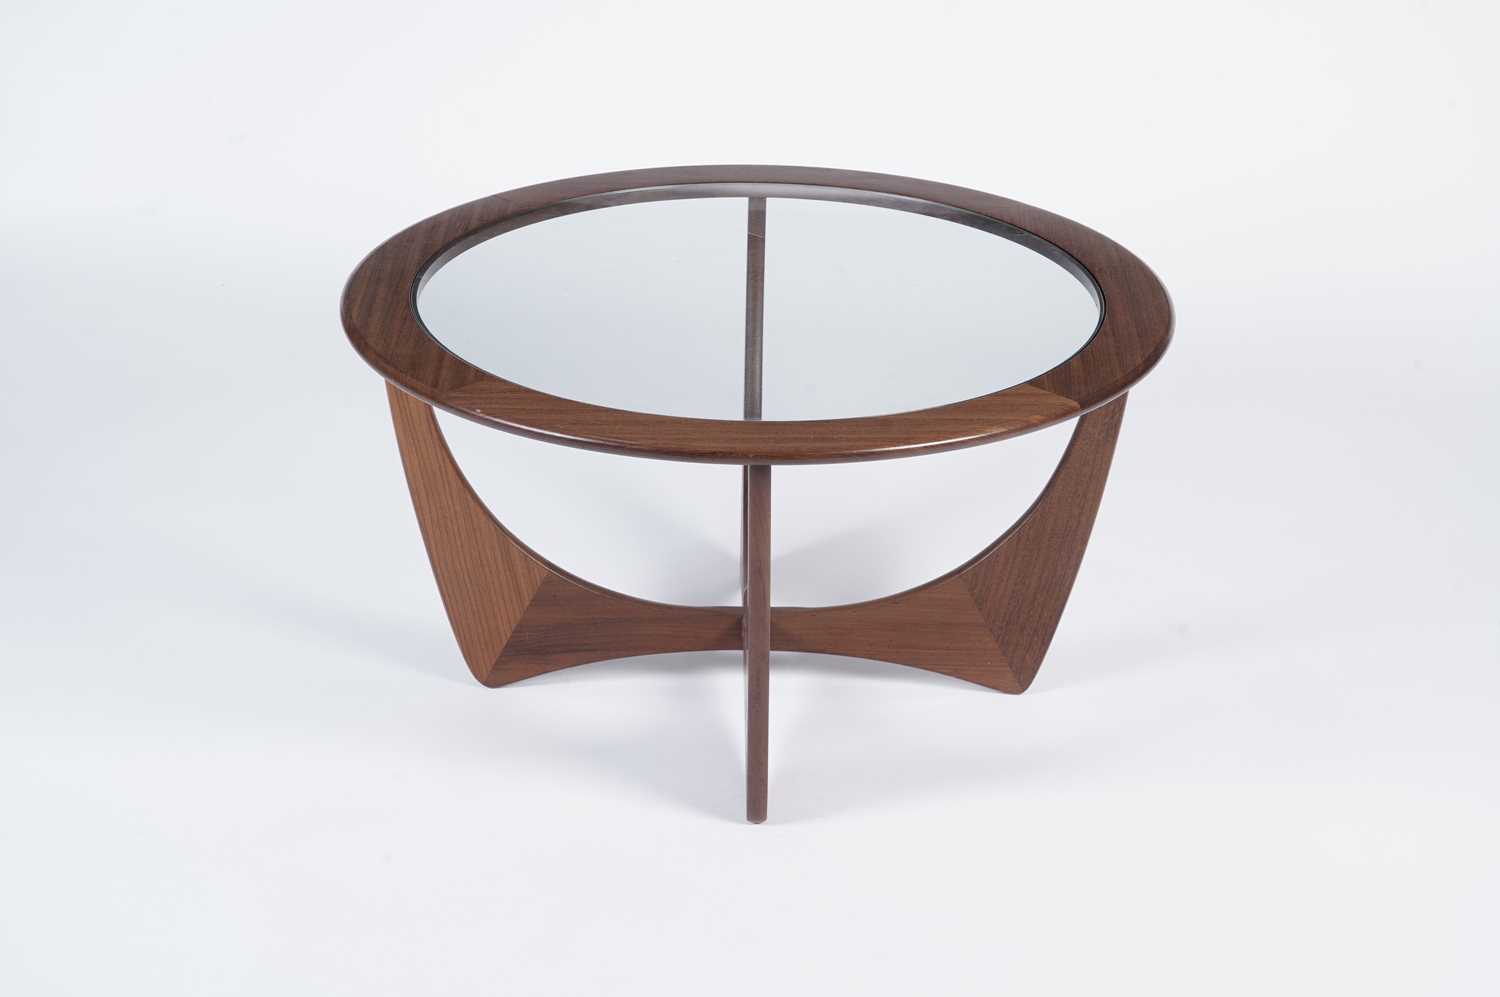 Victor B. Wilkins for G-Plan: an 'Astro' coffee table - Image 2 of 3